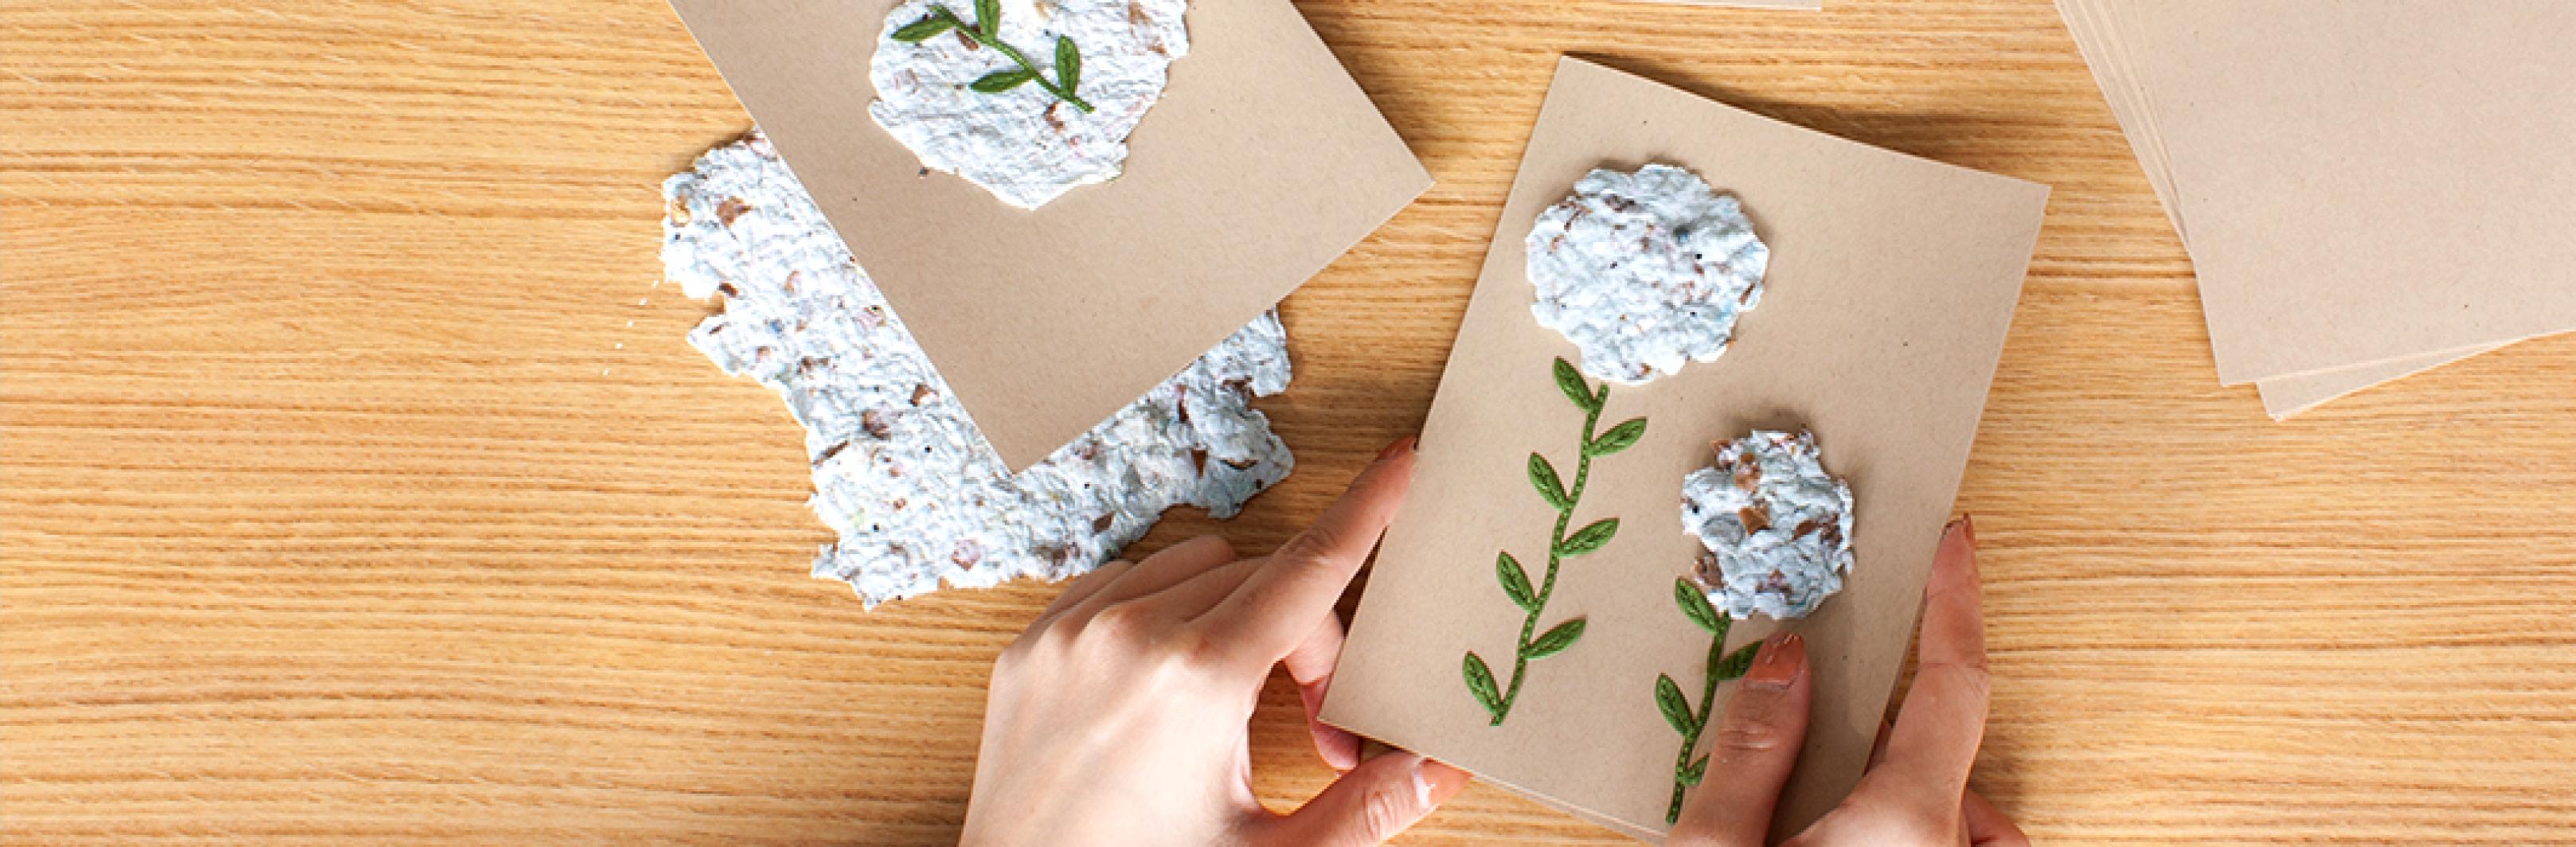 How to Make Your Own Paper: Handmade Seed Paper Instructions